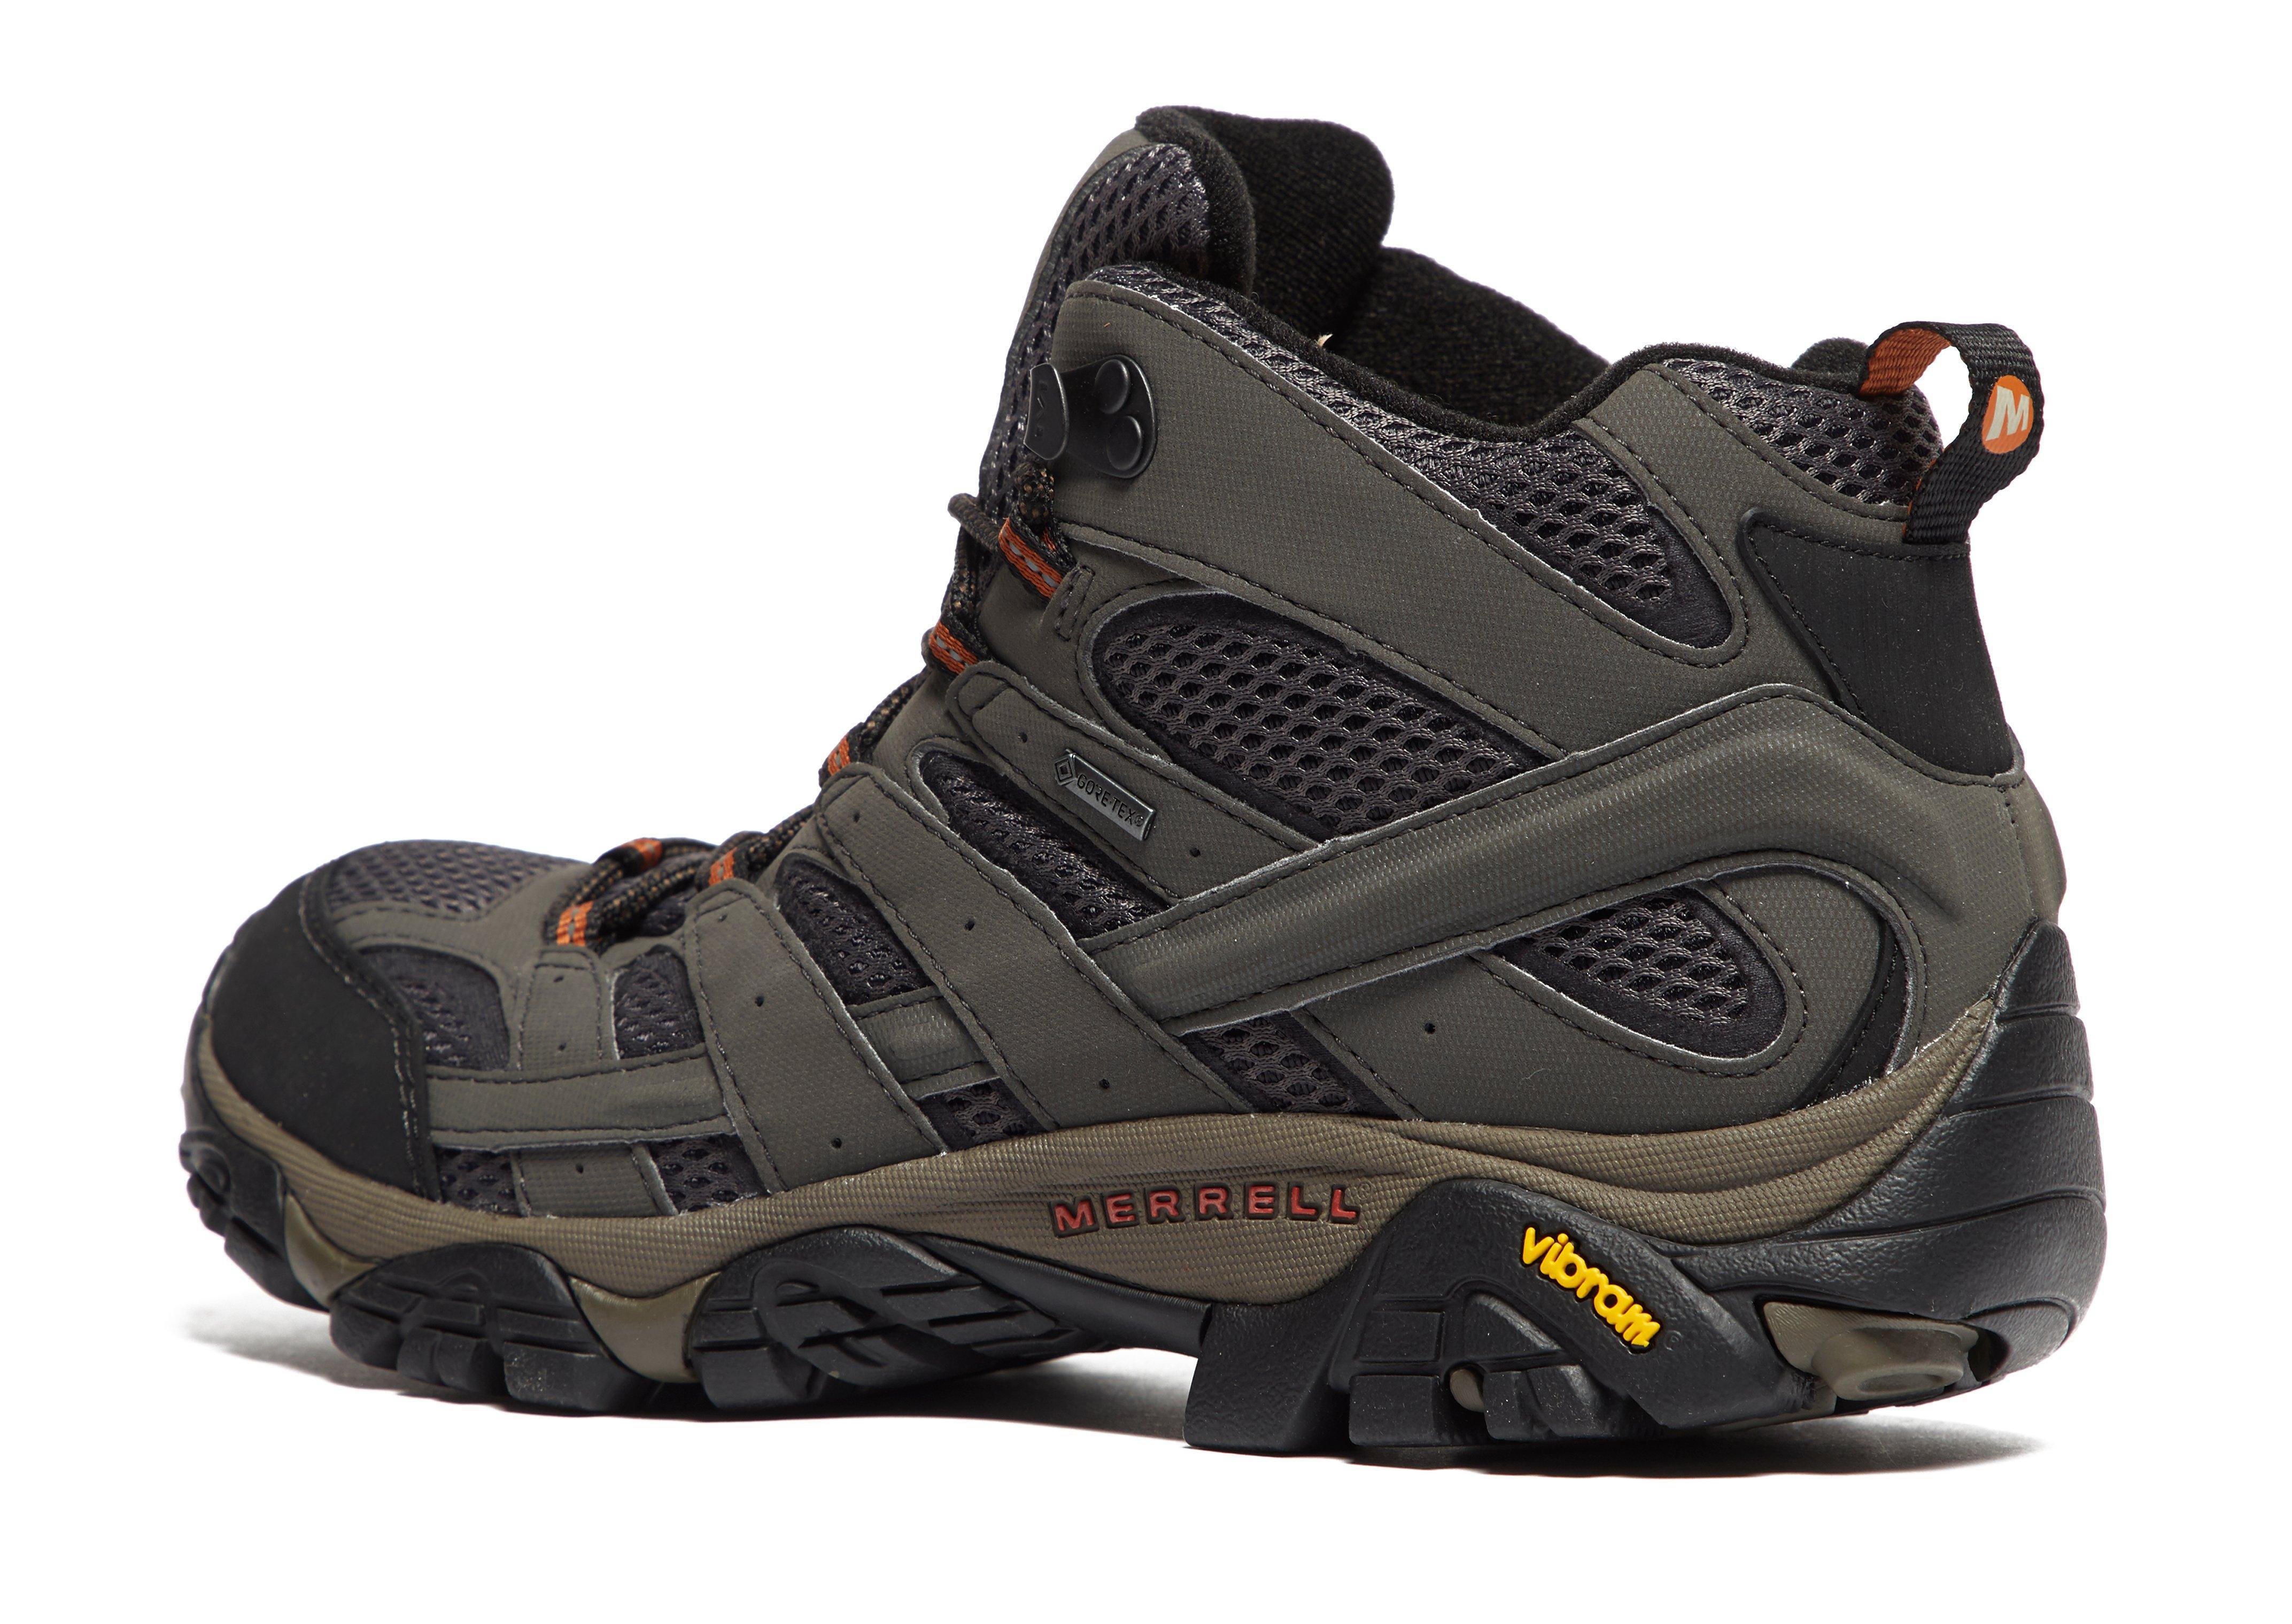 Merrell Rubber Moab 2 Mid Gore Tex Hiking Boots In Grey Gray For Men Lyst